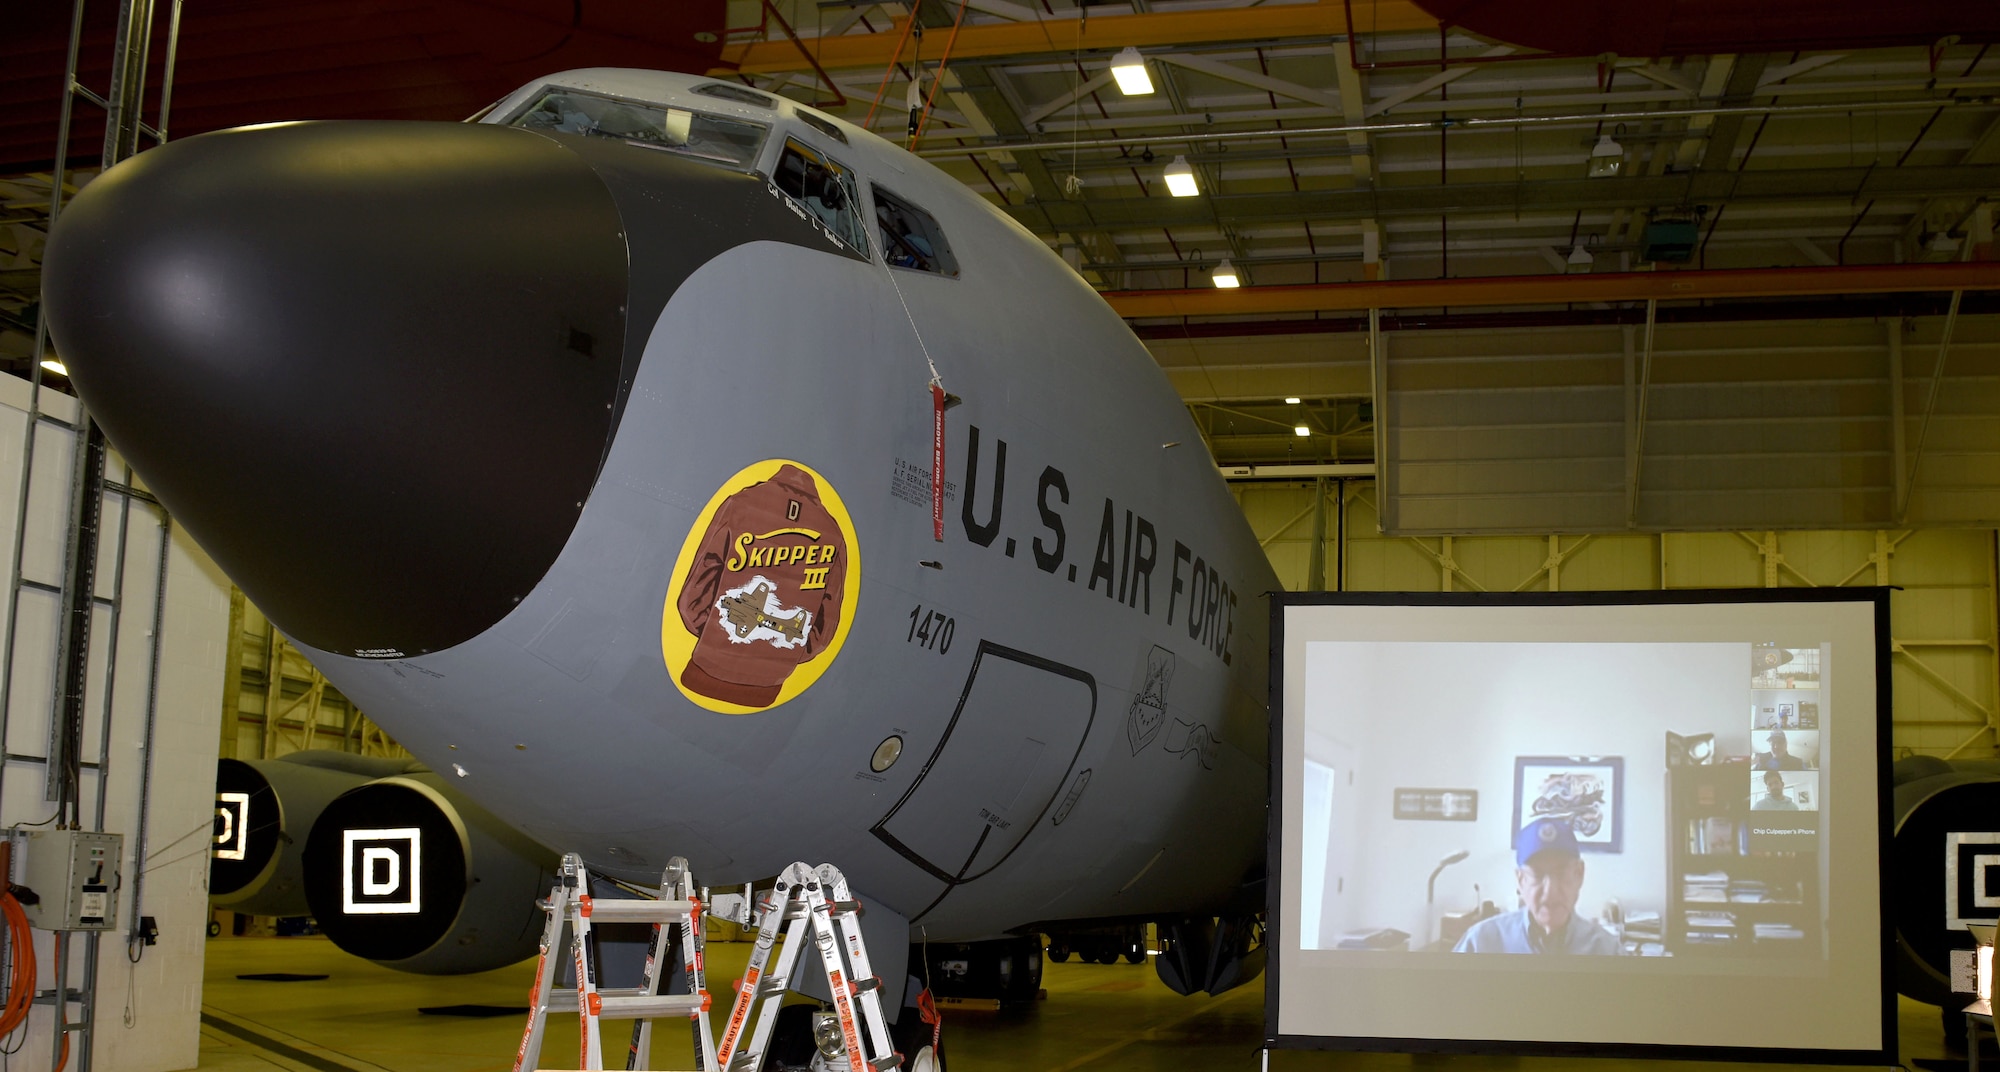 A U.S. Air Force KC-135 Stratotanker aircraft adorns the 100th Air Refueling Wing’s newest heritage nose art, “Skipper III,” as Gary Christopher, on screen, views it virtually during a ceremony at Royal Air Force Mildenhall, May 7, 2021. The nose art, designed by Gary Rogers, 100th ARW Public Affairs graphic artist, is dedicated to Christopher’s father, retired Master Sgt. Dewey Christopher, former 351st Bomb Squadron maintainer and crew chief of the 100th Bombardment Group and World War II. Dewey passed away in 2019. The jet was also “adopted” by the 100th Mission Support Group as part of RAF Mildenhall’s “Adopt-a-Jet” program. (U.S. Air Force photo by Karen Abeyasekere)